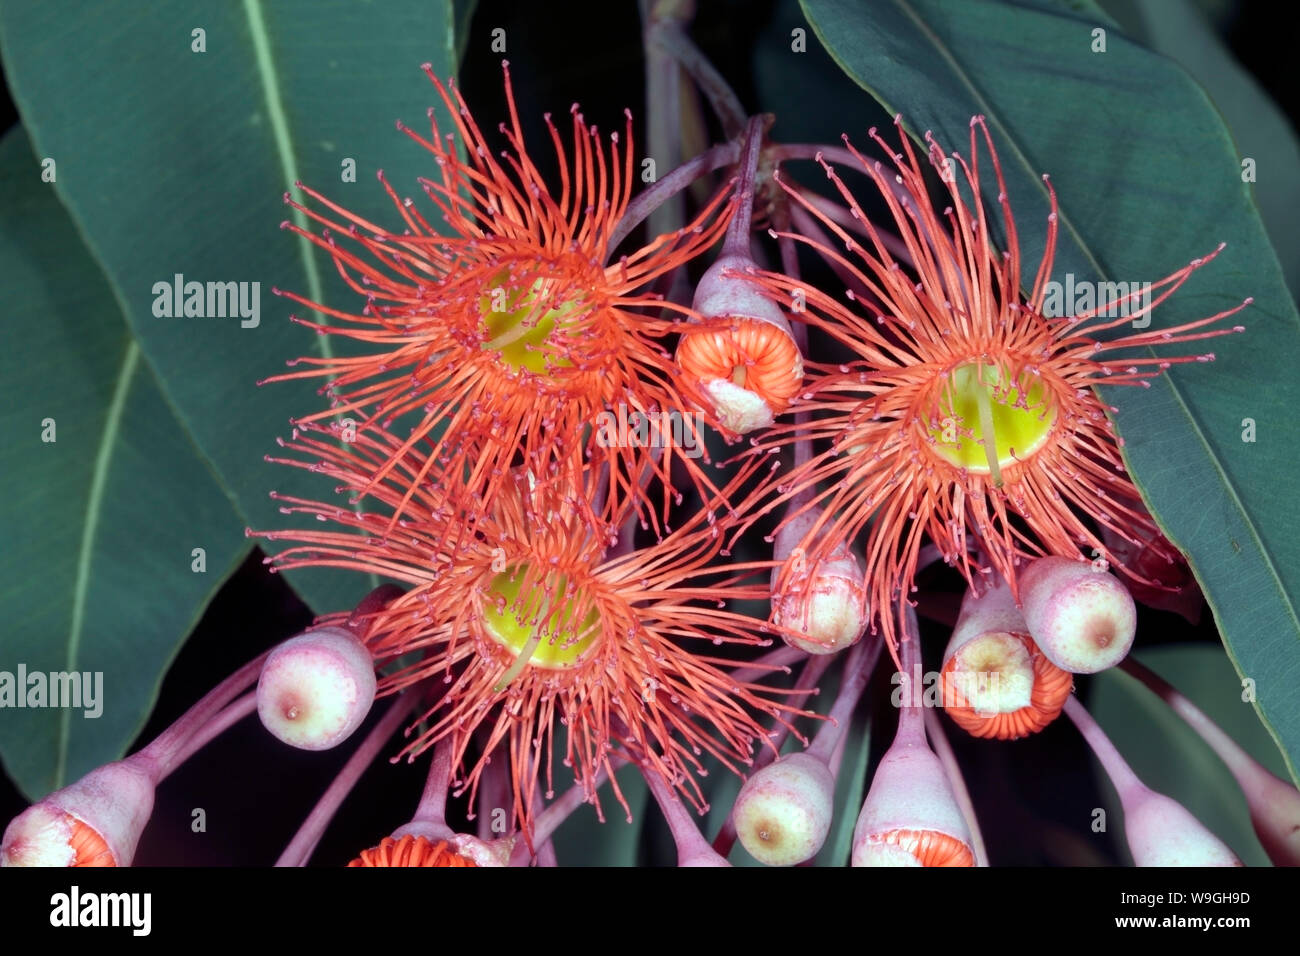 Close-up of flowers of Red-flowering gum tree- Eucalyptus ficifolia- Family Stock Photo